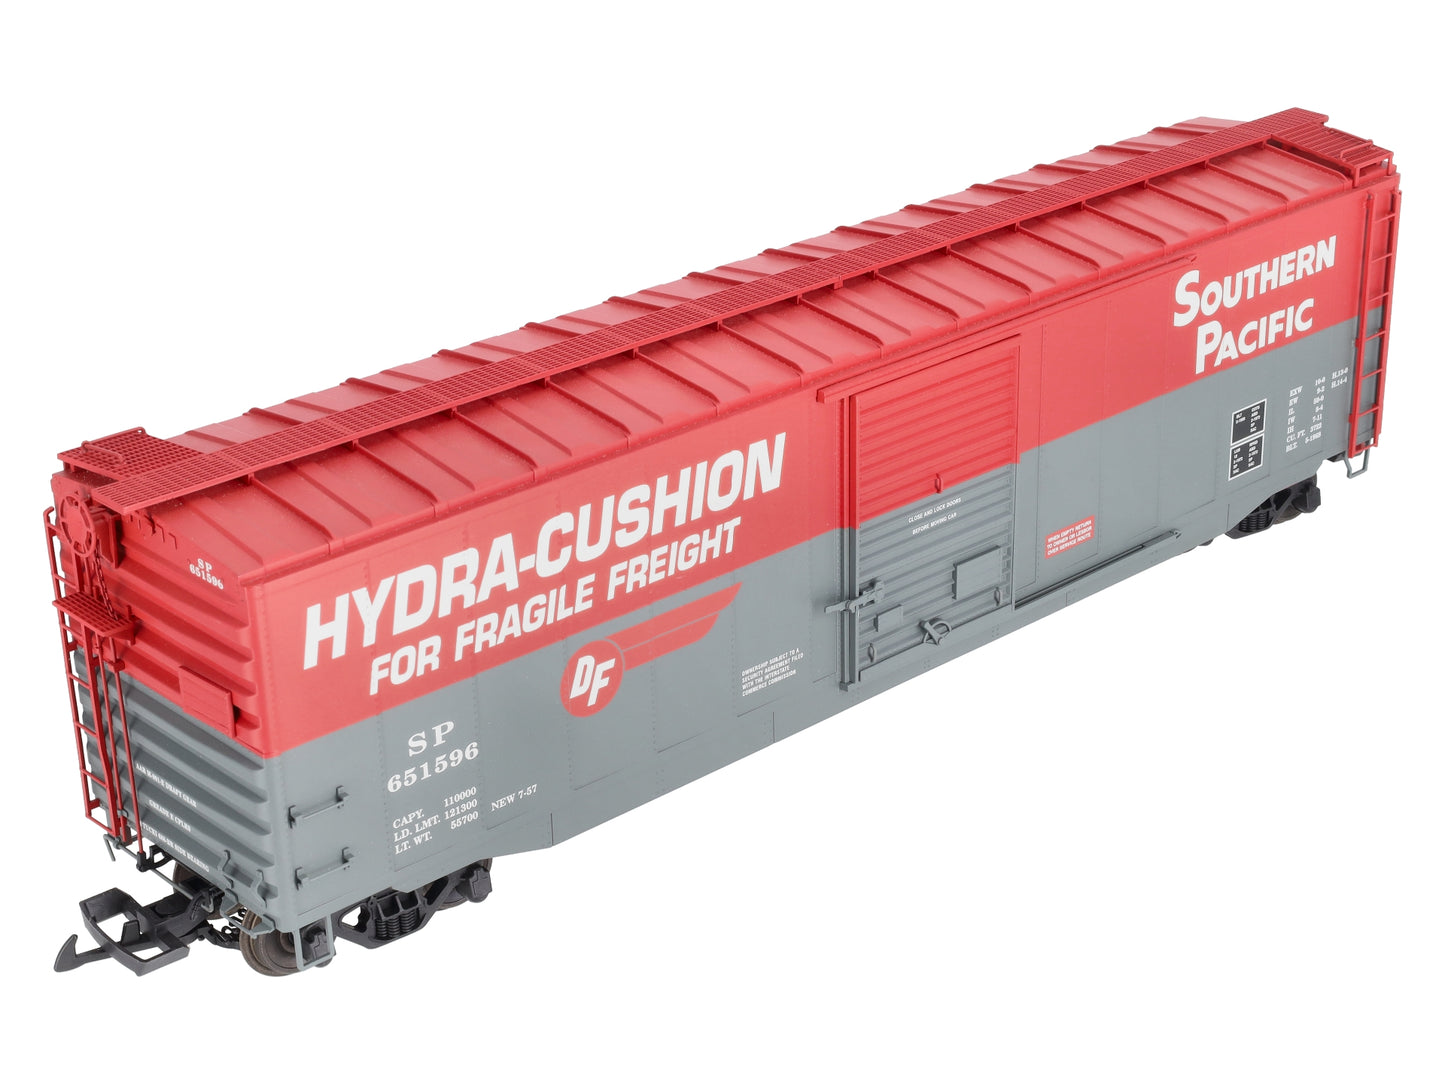 USA Trains R19302A G Southern Pacific 50 Ft. Box Car with Steel Door #651597